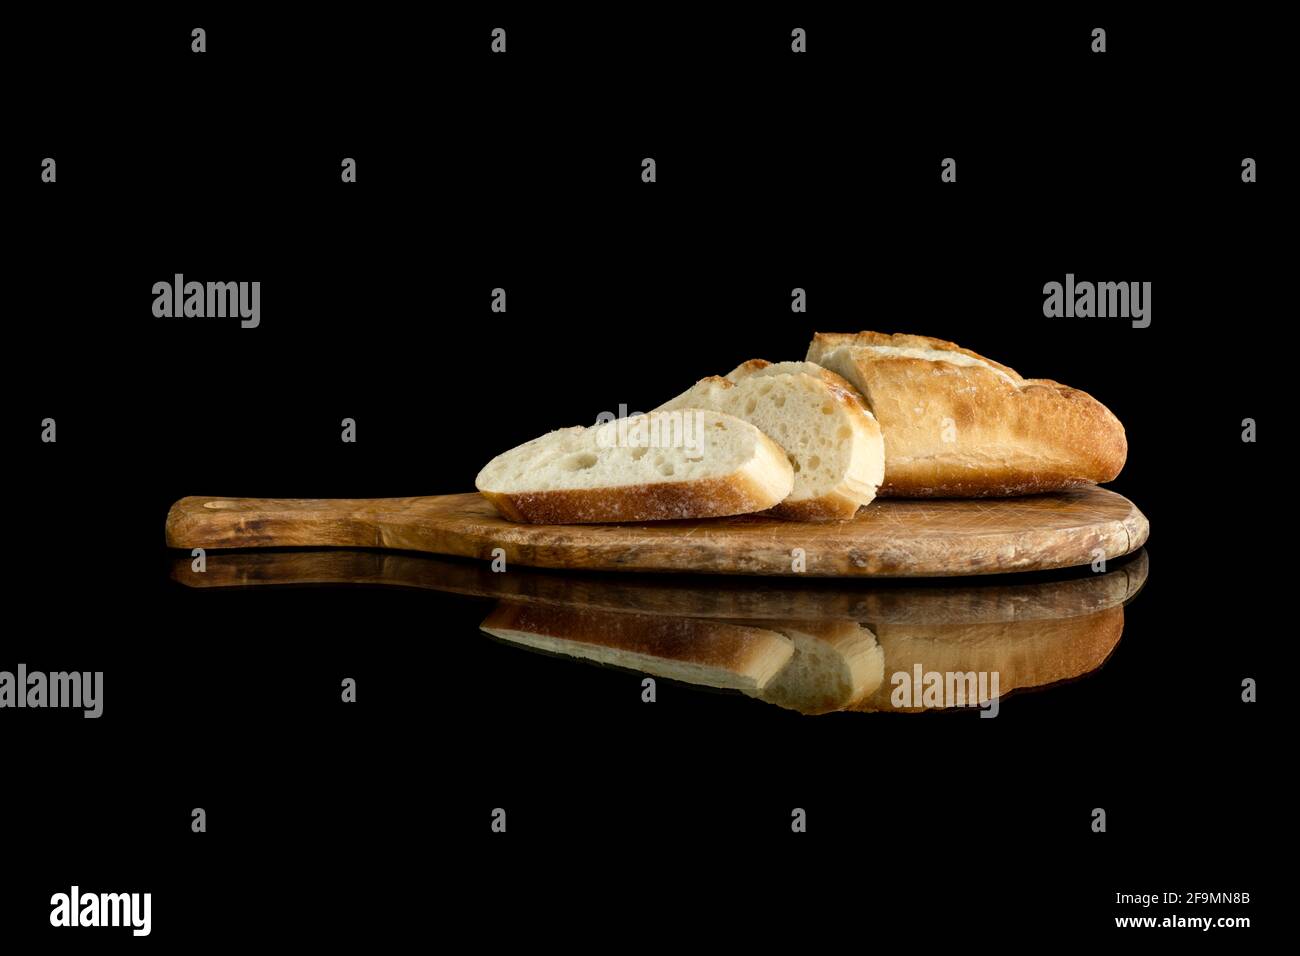 Image of bread on cutting board with reflection on dark background Stock Photo